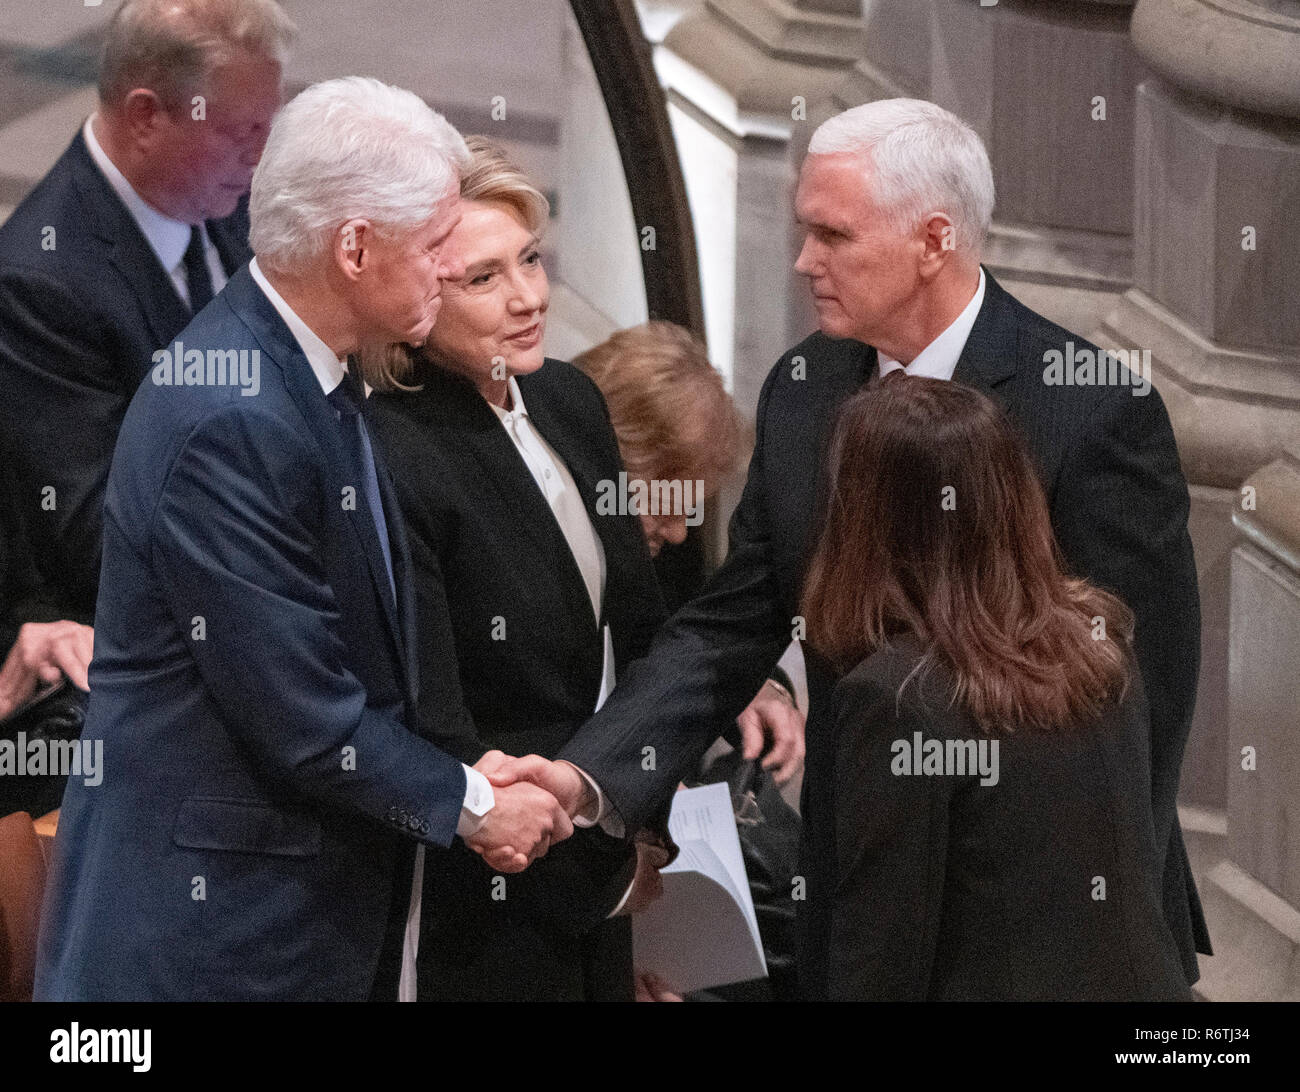 Former United States President Bill Clinton, left, shakes hands with US Vice President Mike Pence, left, as former US Secretary of State Hillary Rodham Clinton, center, looks on prior to the start of the National funeral service in honor of the late former United States President George H.W. Bush at the Washington National Cathedral in Washington, DC on Wednesday, December 5, 2018. Credit: Ron Sachs/CNP (RESTRICTION: NO New York or New Jersey Newspapers or newspapers within a 75 mile radius of New York City) | usage worldwide Stock Photo